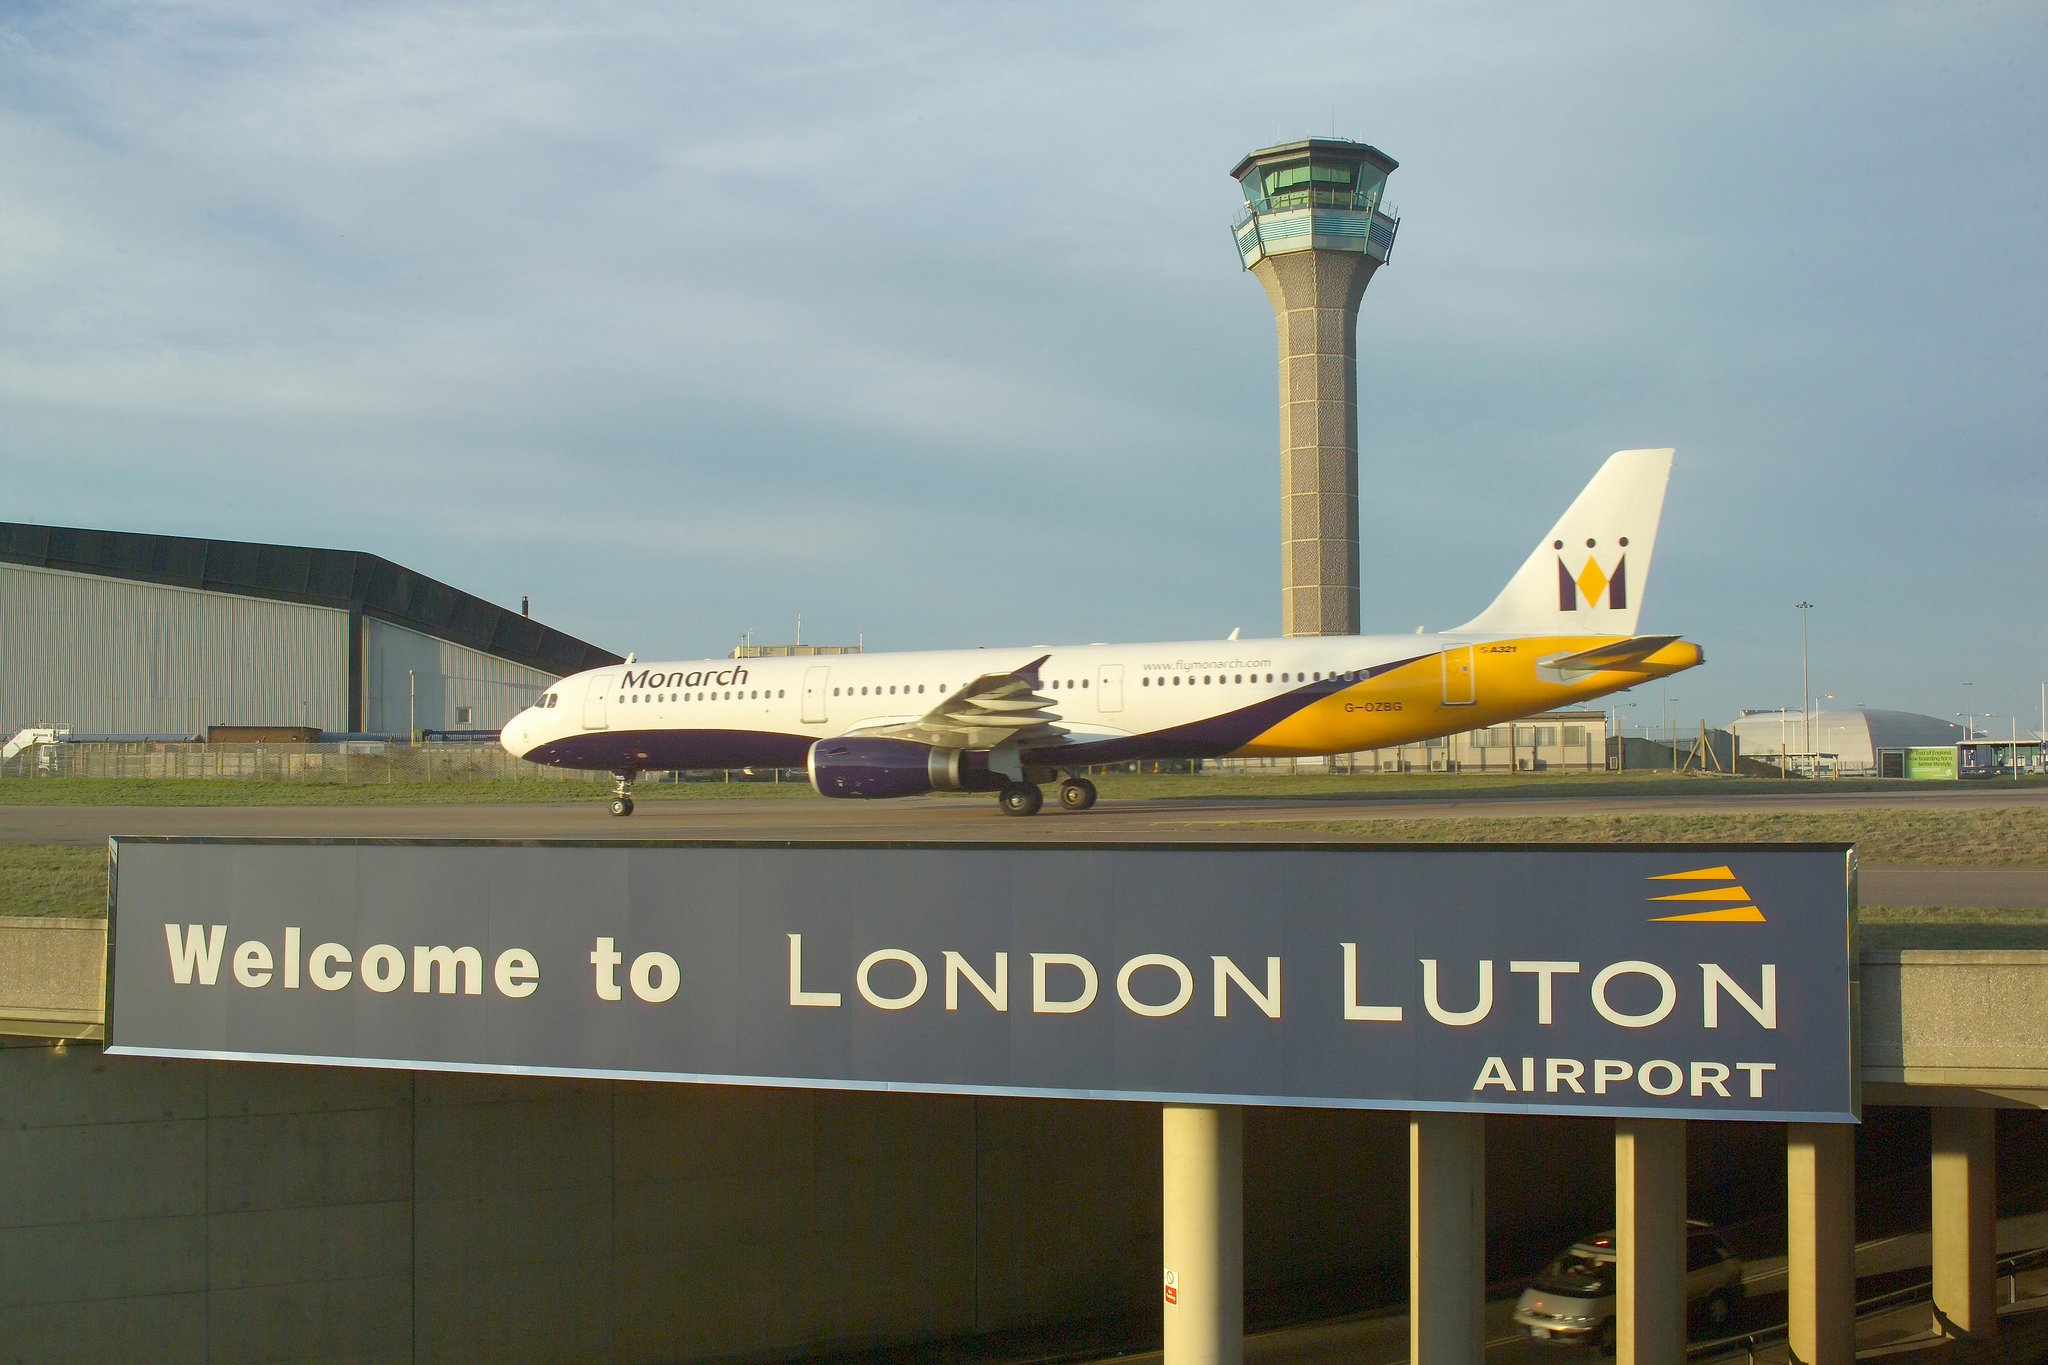 NEW TRAFFIC HIGH FOR LONDON LUTON AIRPORT